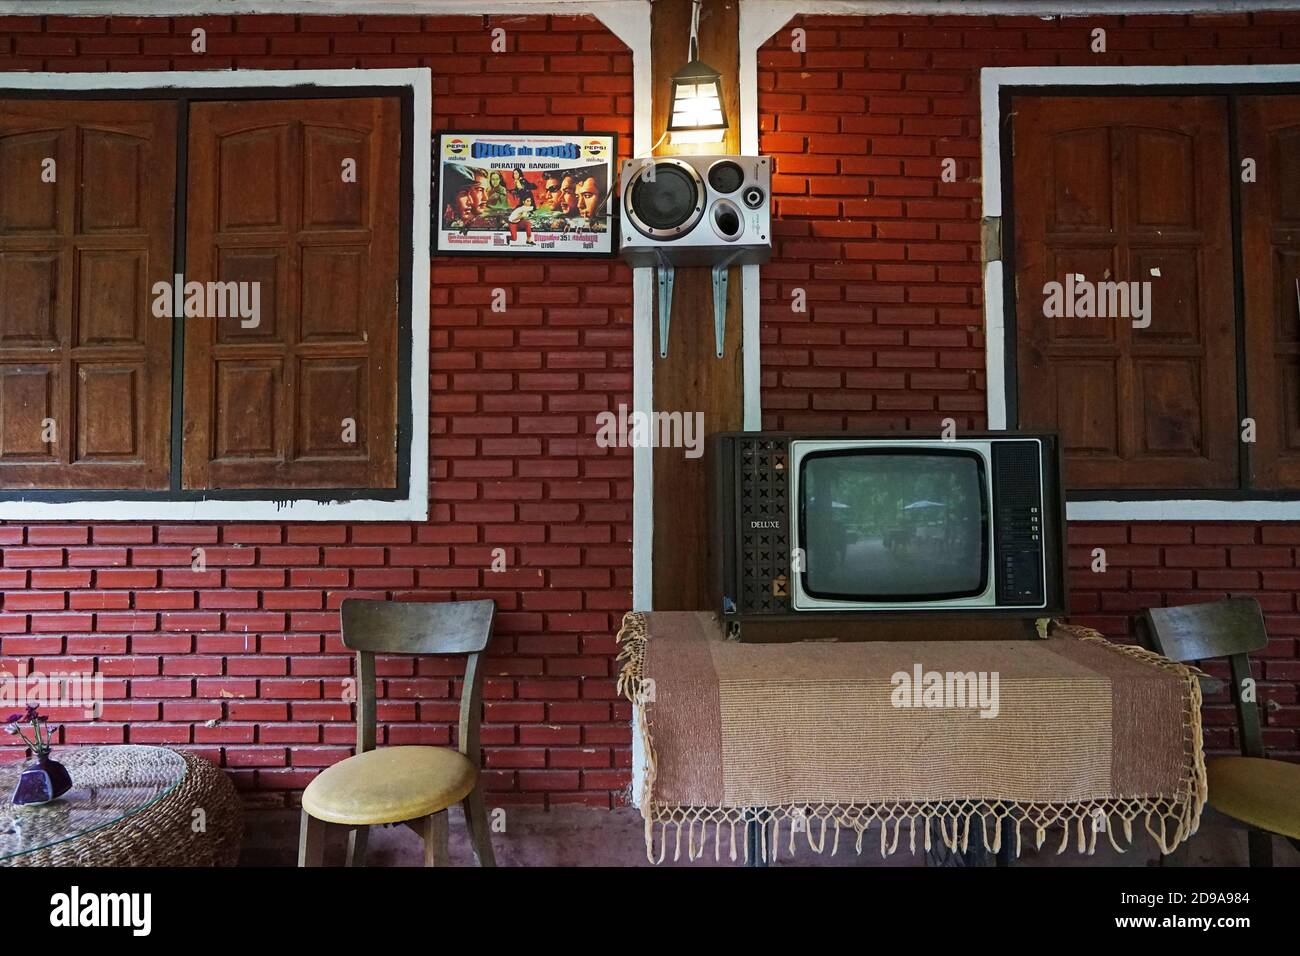 Interior design and decoration of Thai living room corner decorated with vintage television, red brick wall and wooden window frame Stock Photo